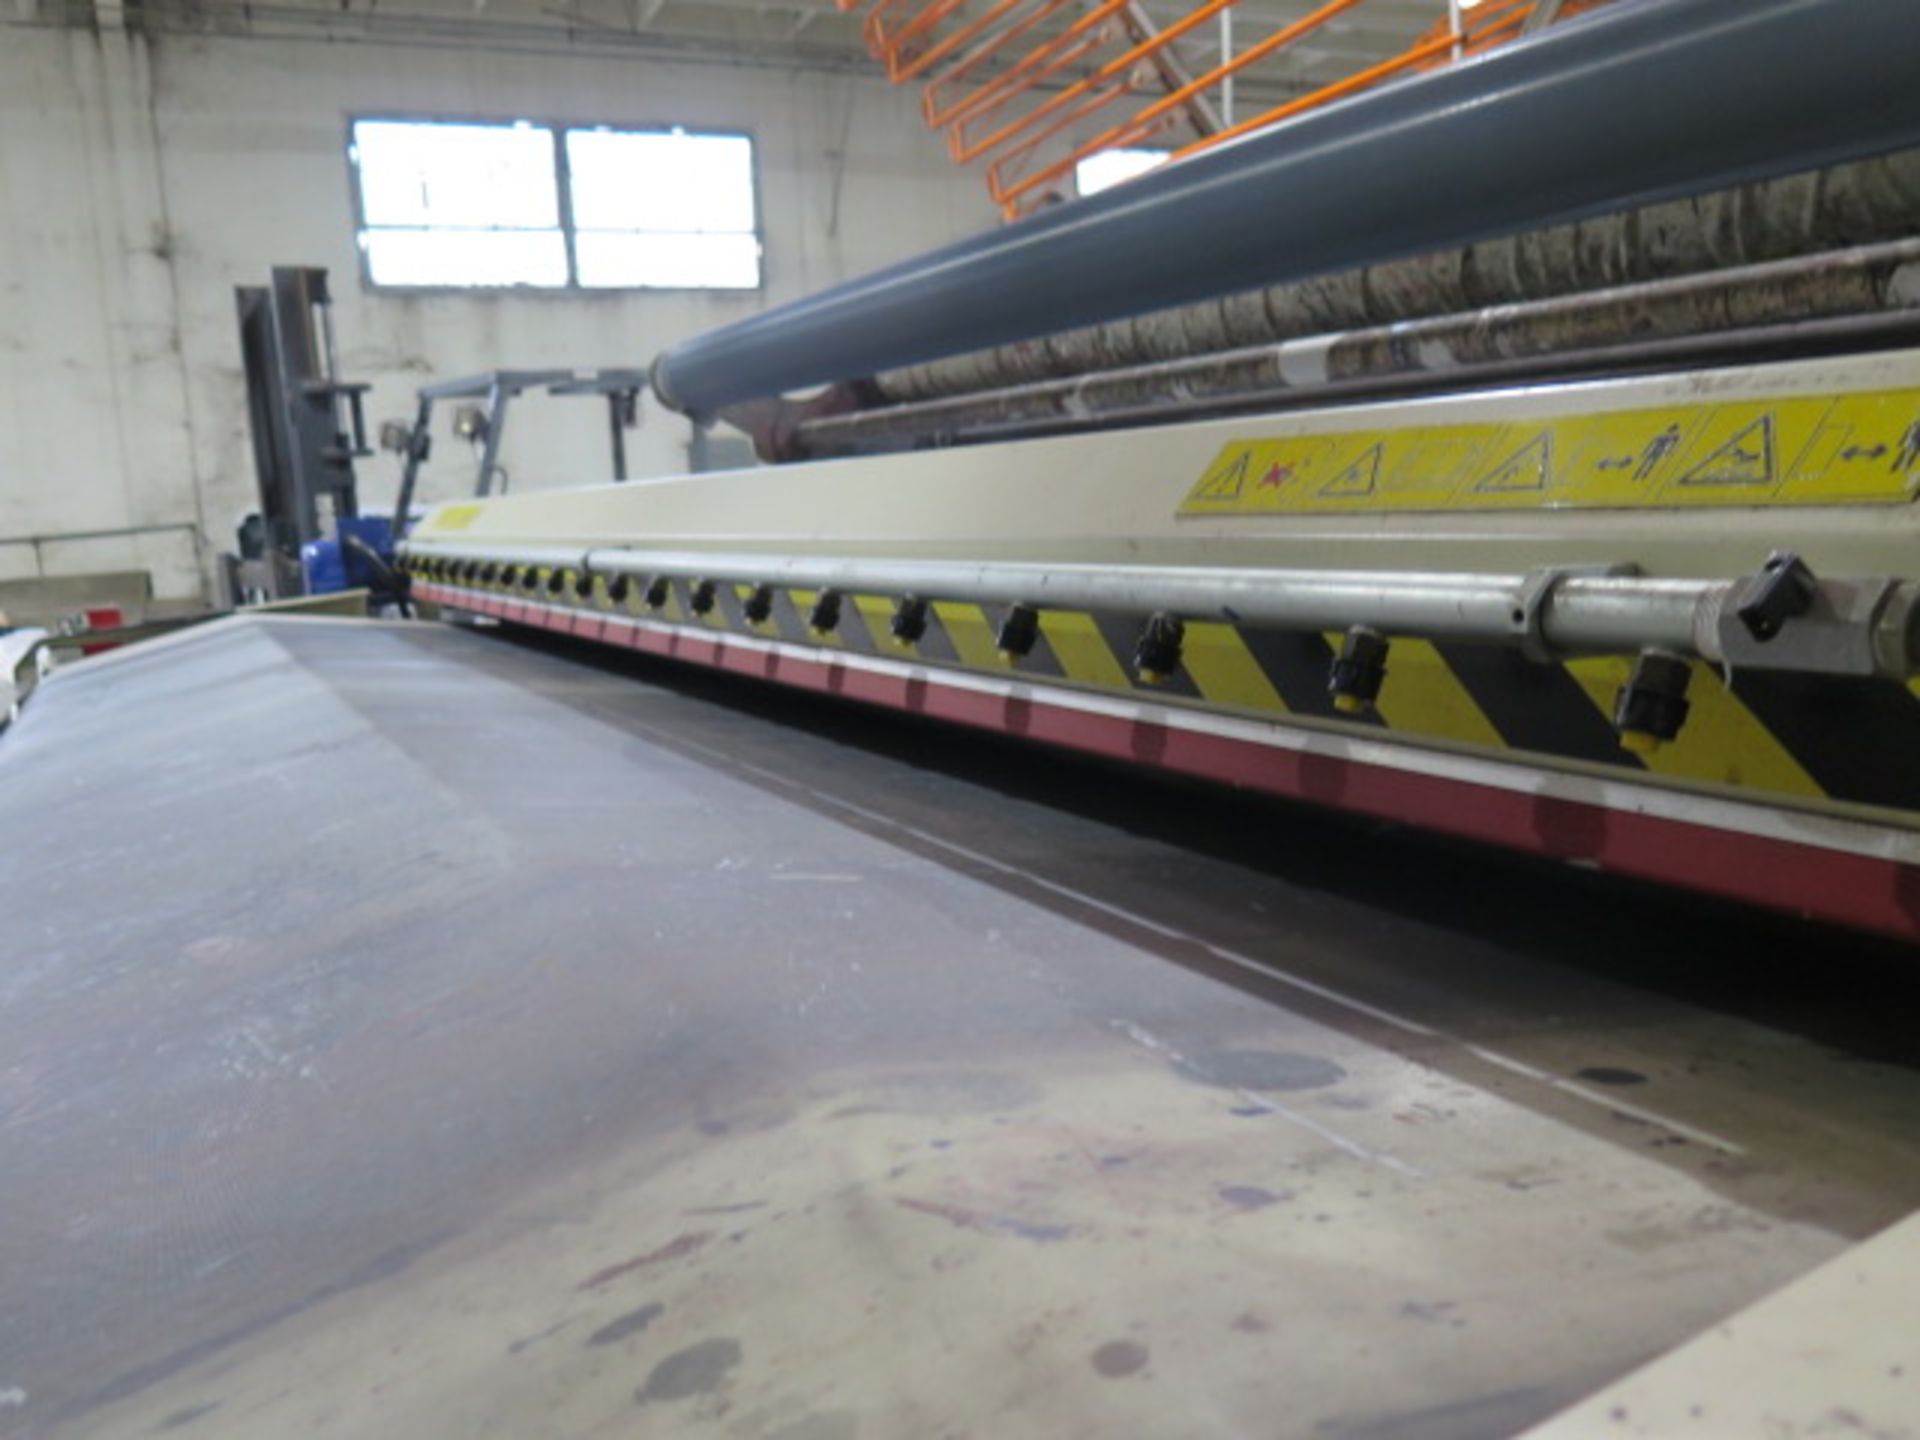 2015 Gemata Rifinizlone A Rullo “Megastar” 3400/3/15 Roller Pigment Coating Machine SOLD AS IS - Image 5 of 17